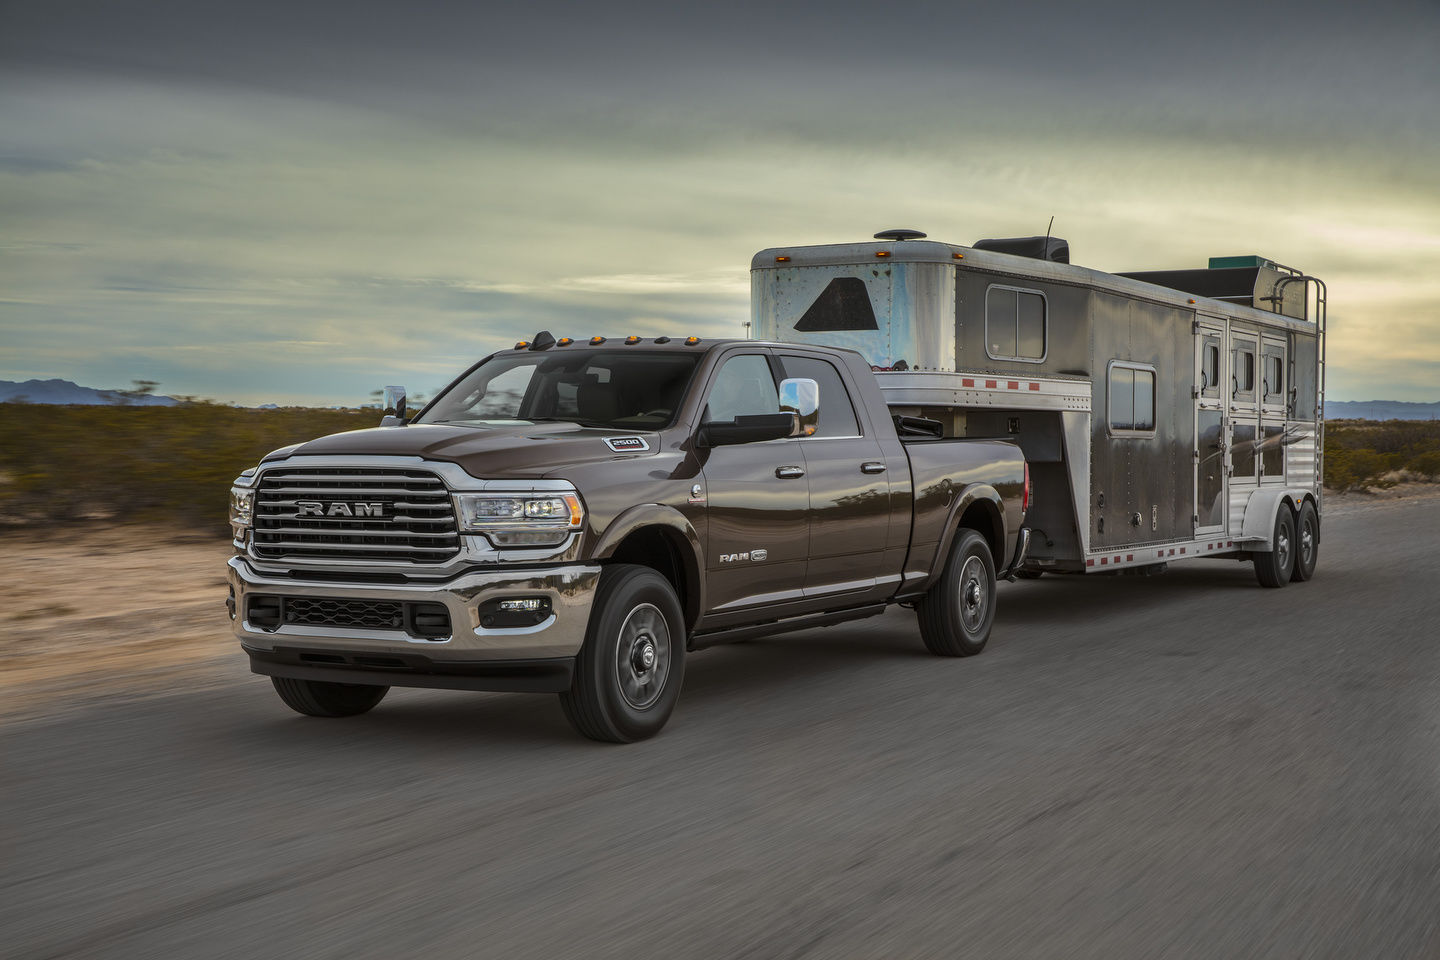 A Comprehensive Overview of the 2023 Ram HD Towing Capacity